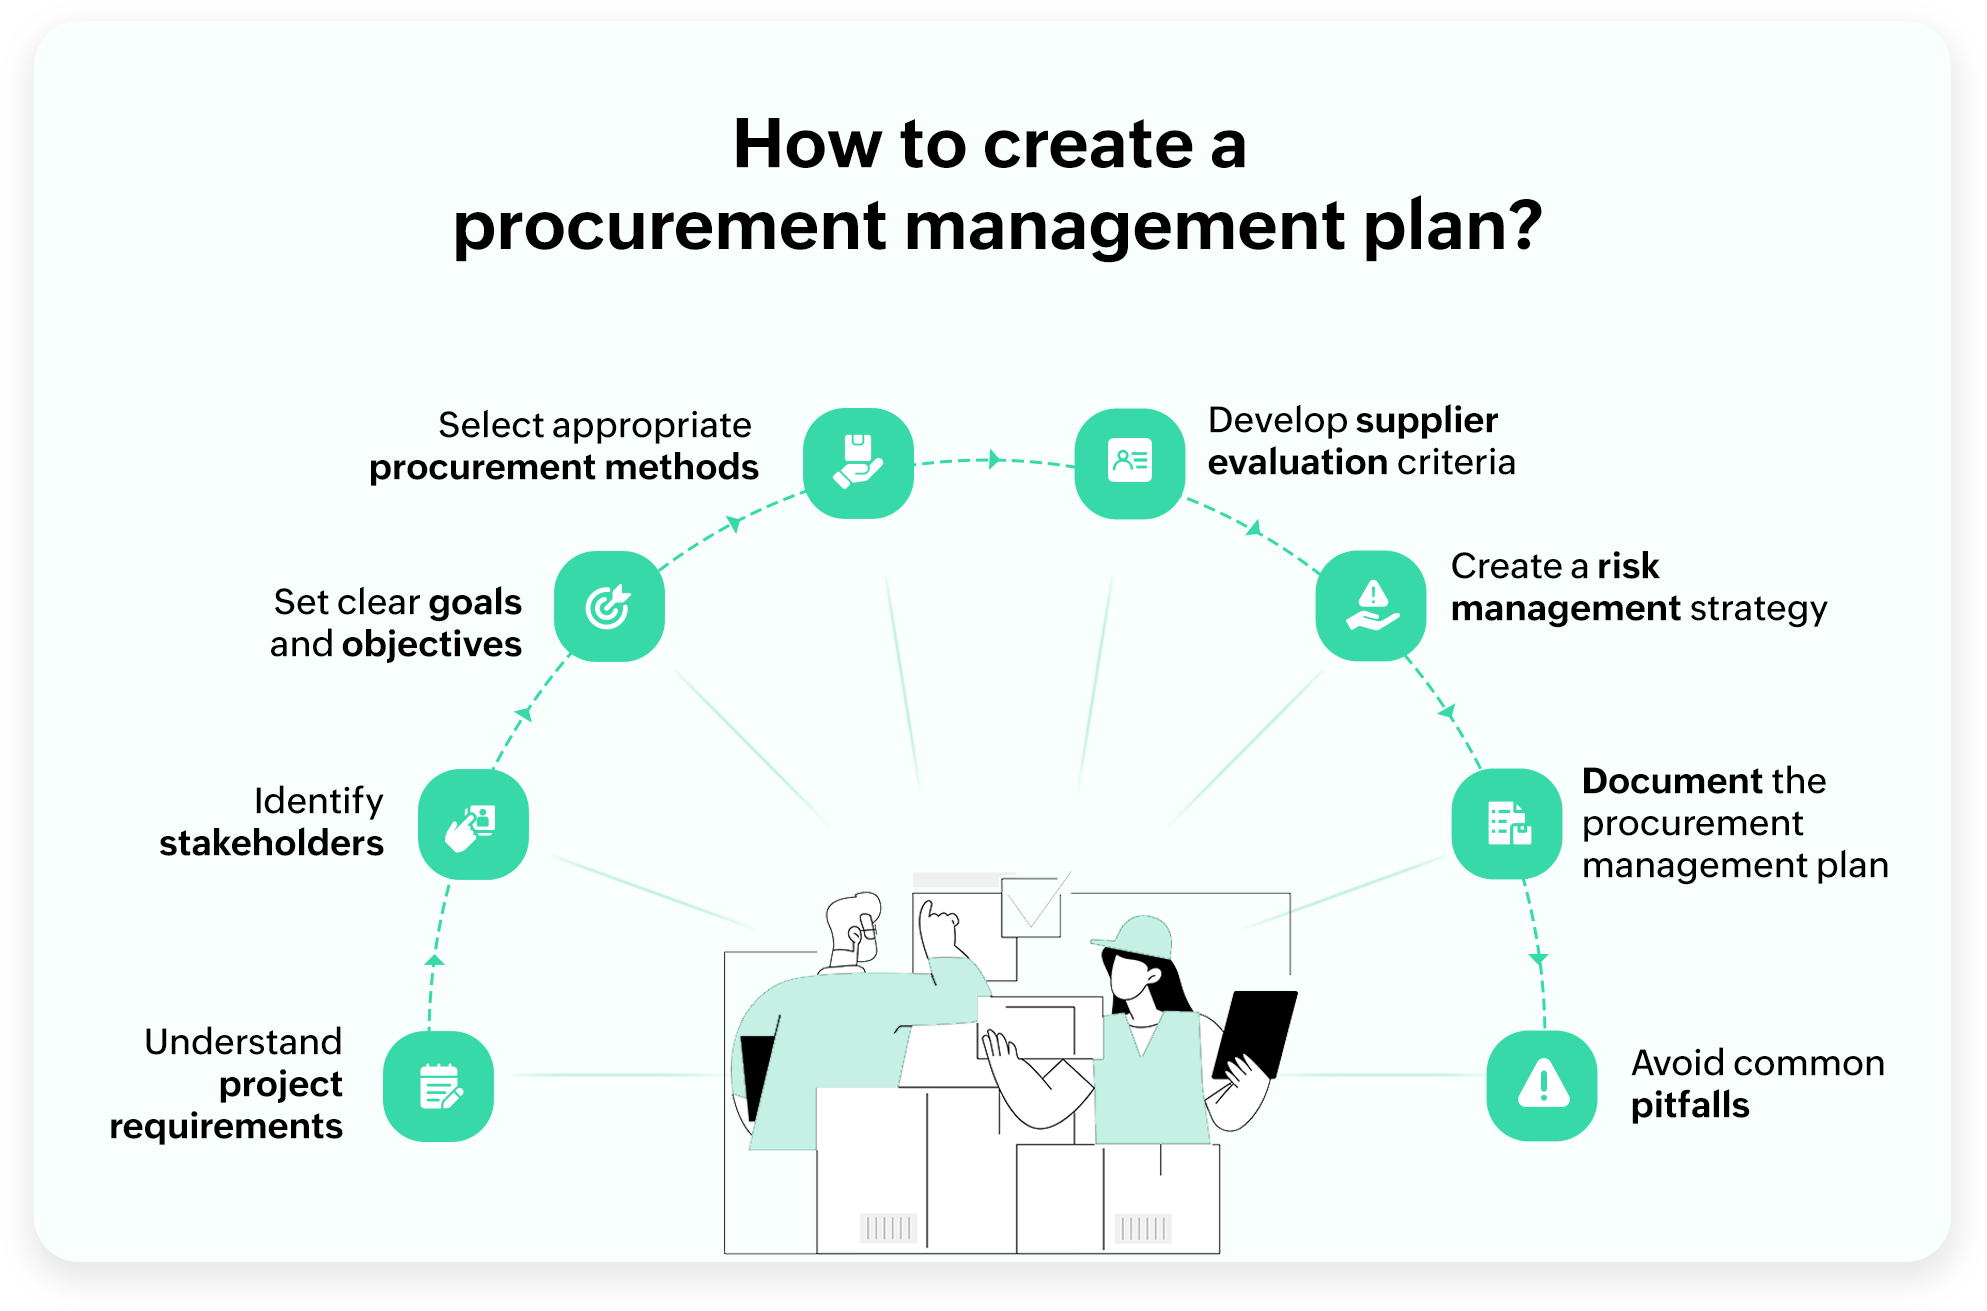 How to create a procurement management plan